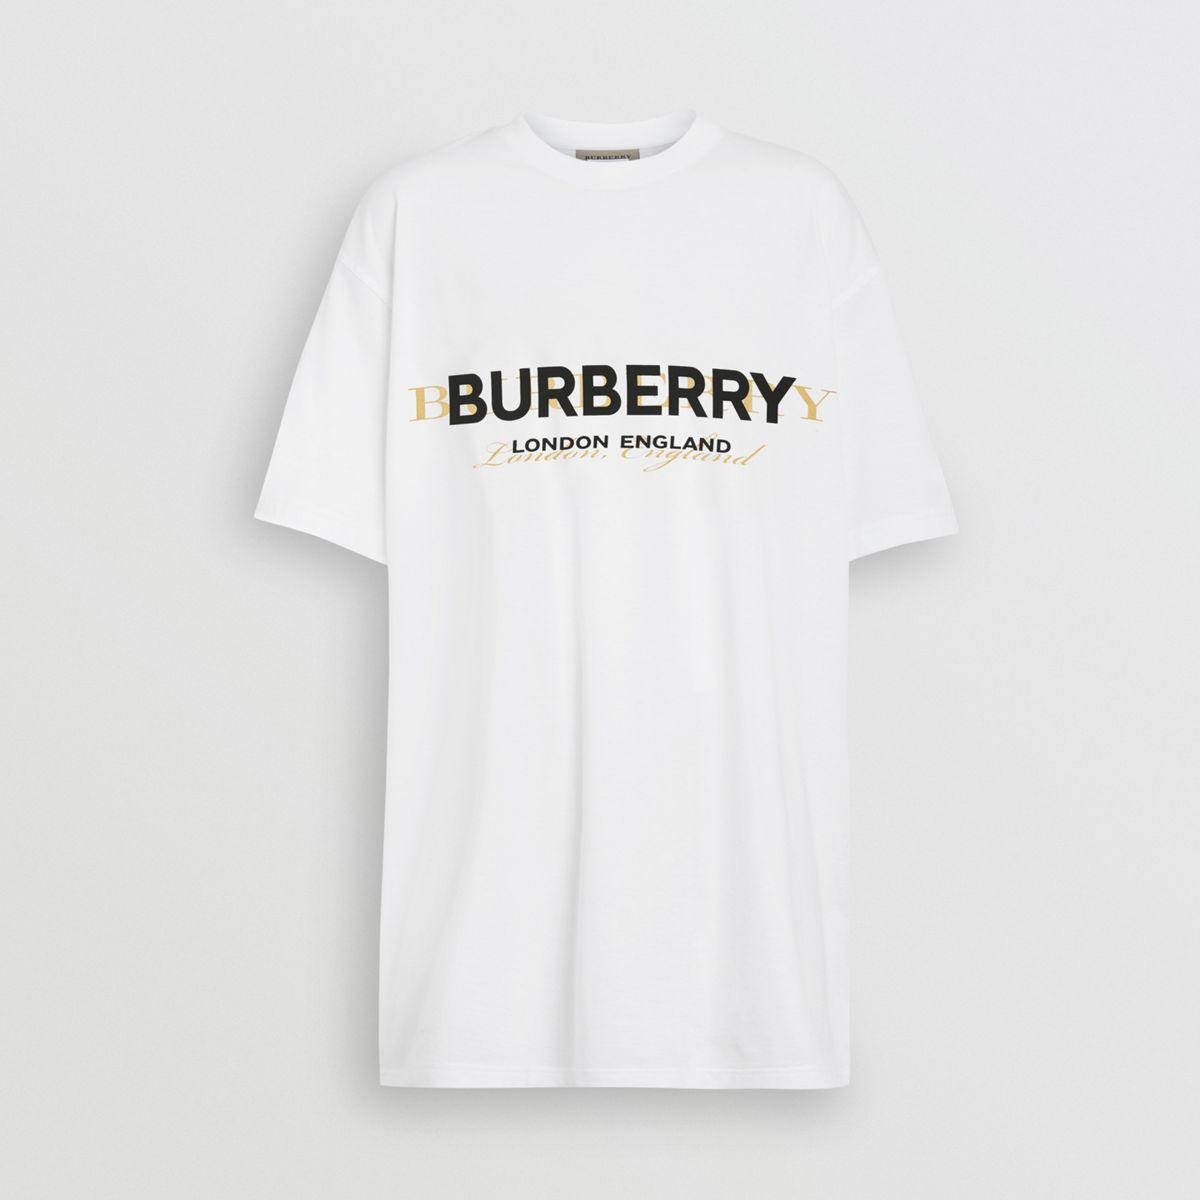 Buy > burberry logo graphic t shirt > in stock